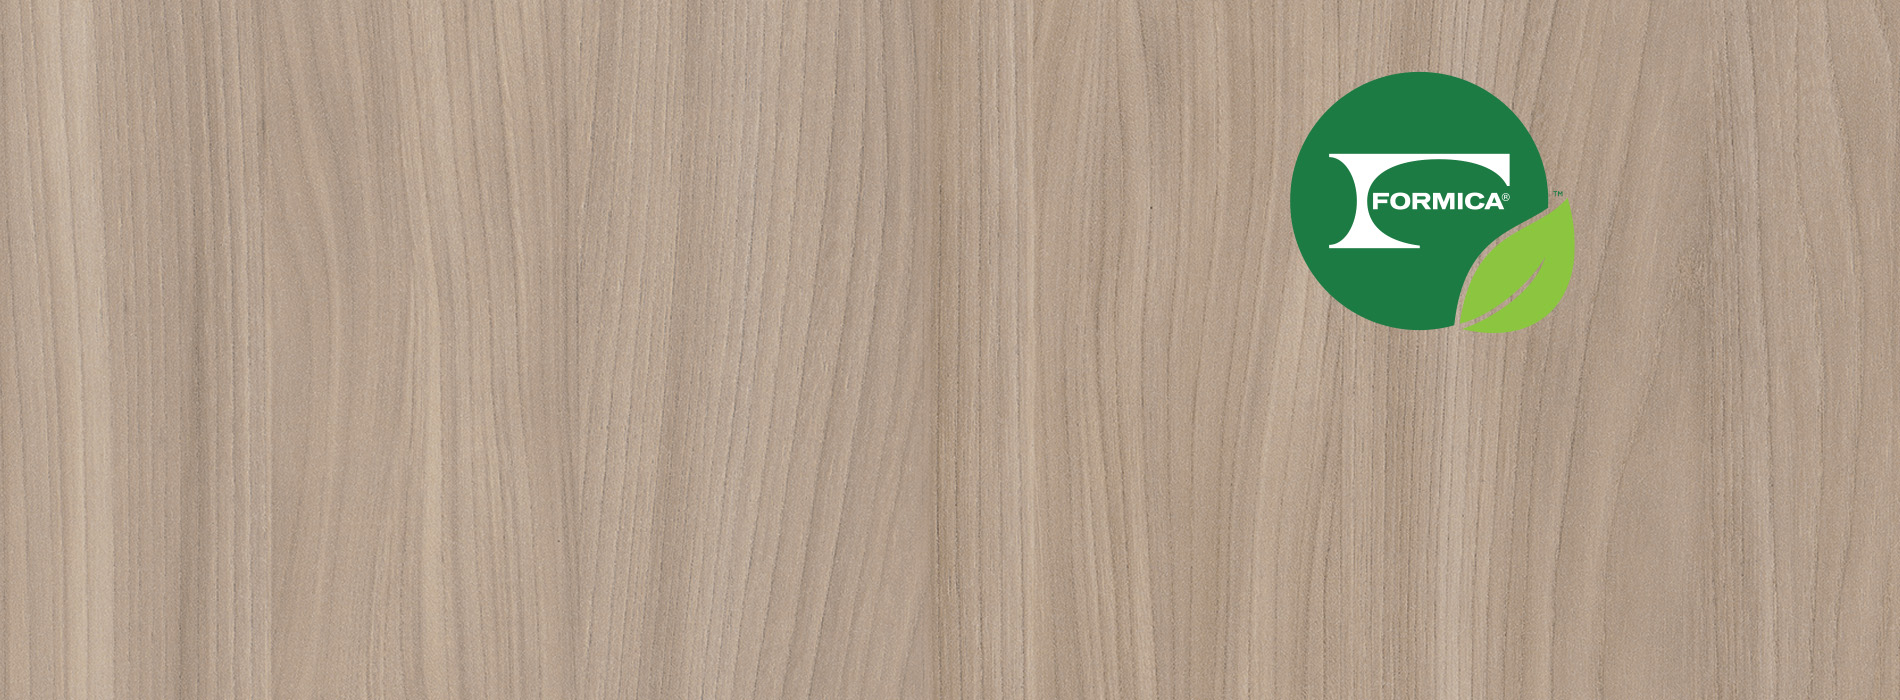 Formica Laminate Woodgrain and Carbon Neutral by 2030 Logo